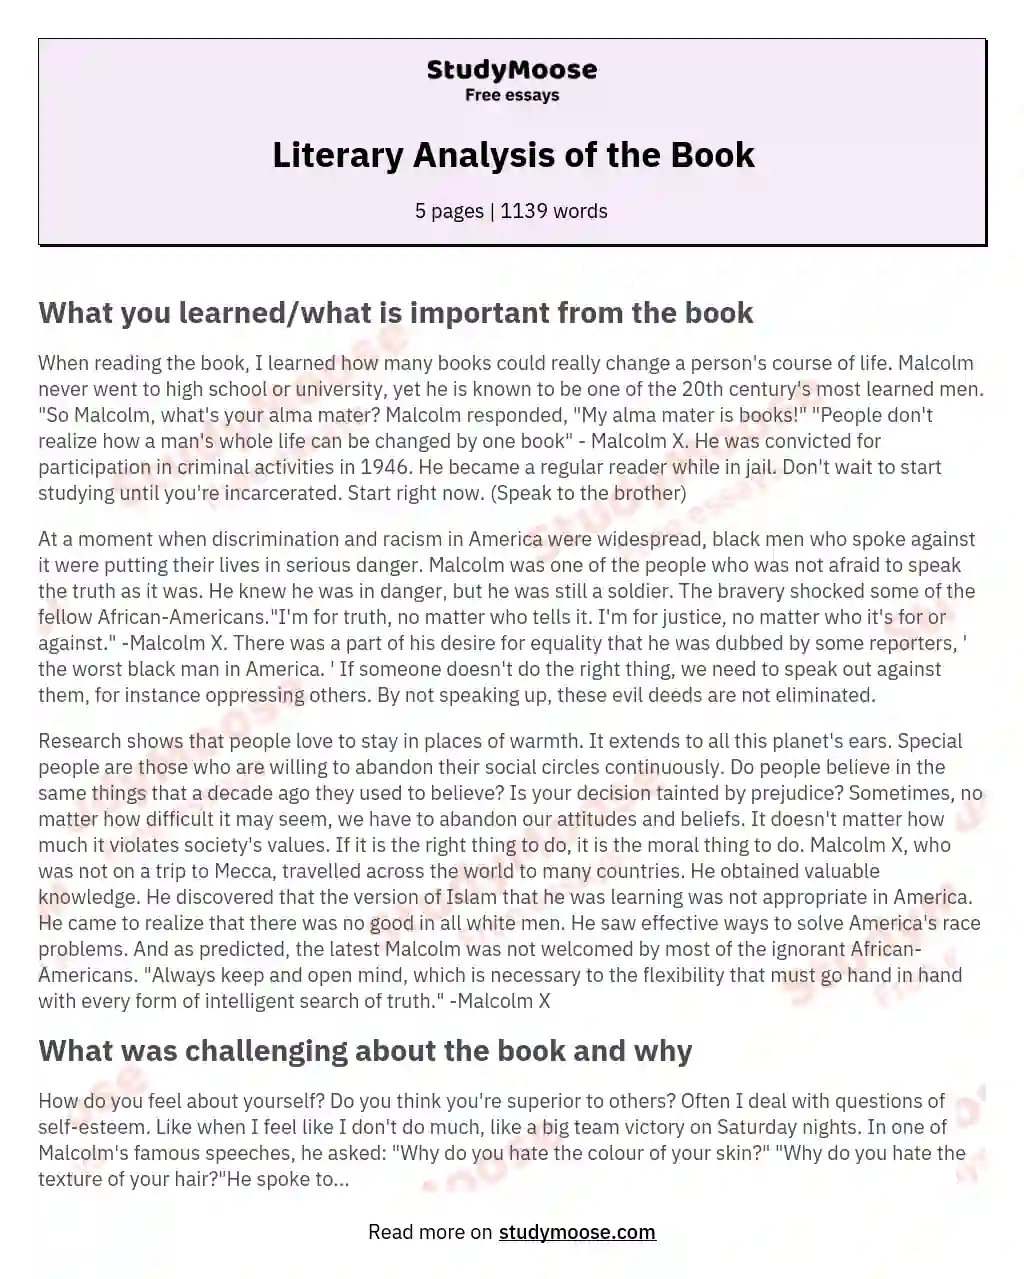 Literary Analysis of the Book essay